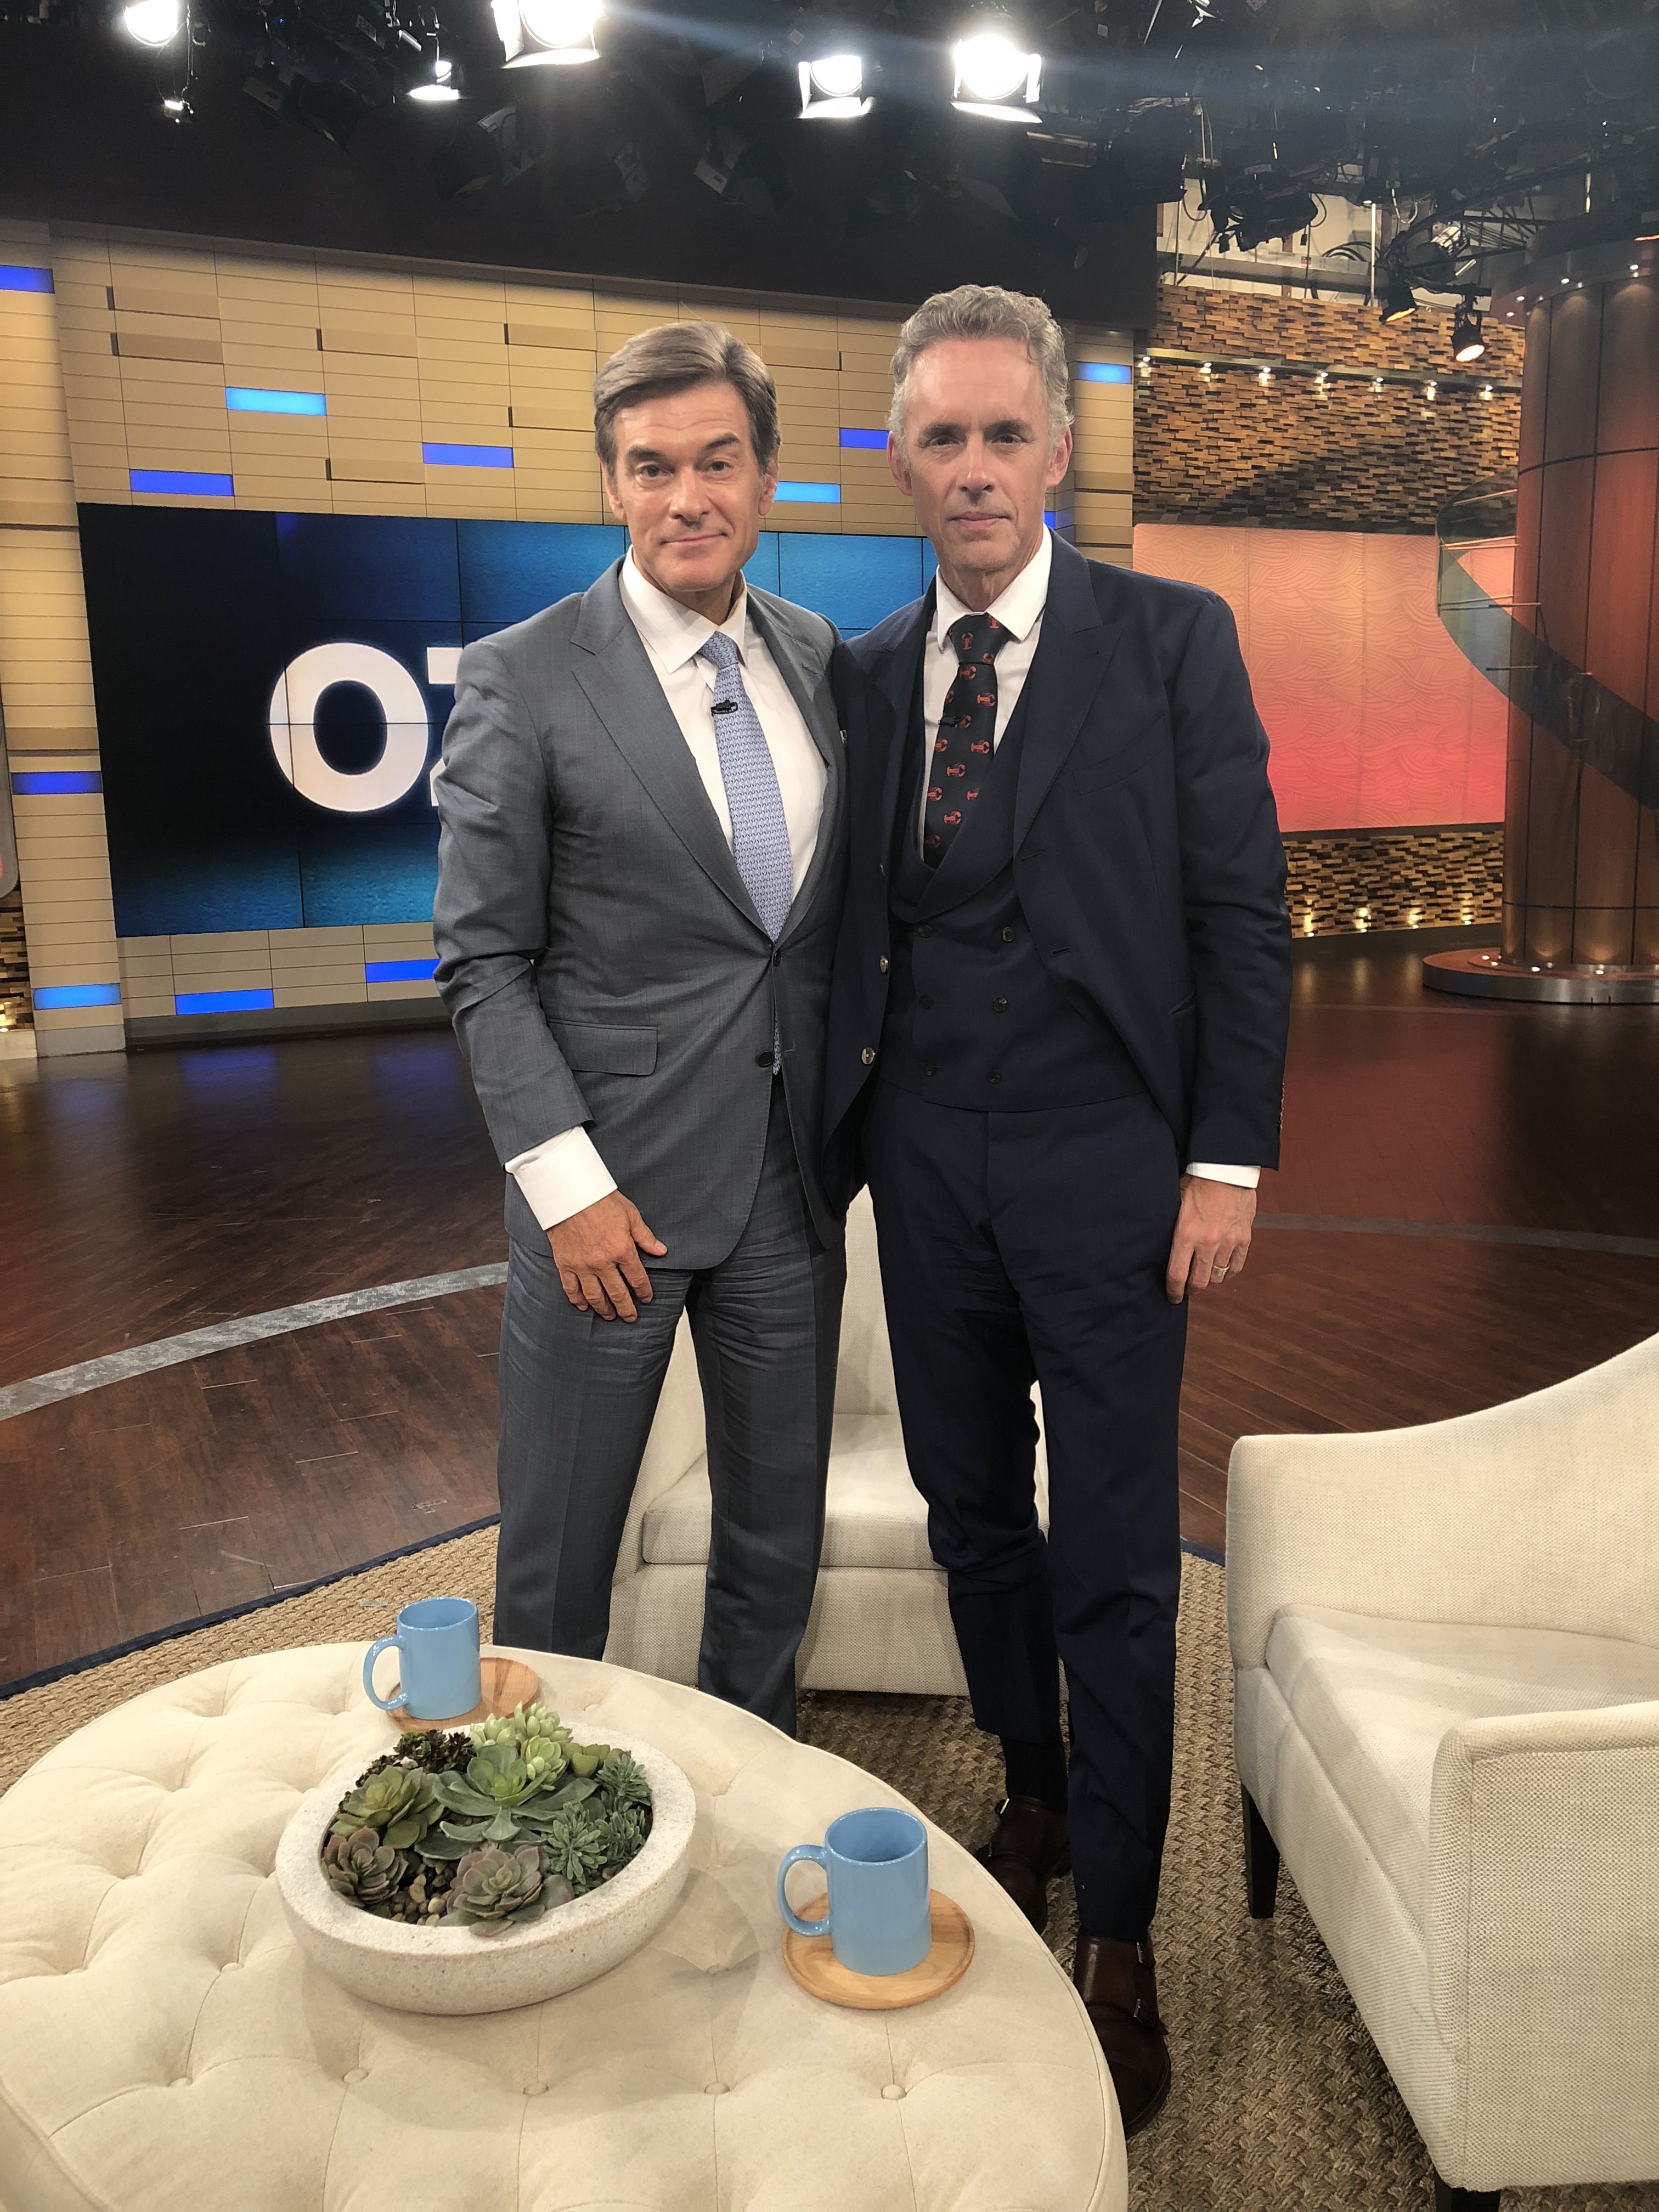 Dr Jordan B Peterson on Twitter: "I'm on Dr. Oz's podcast Oct 2: Download on Apple or an alternative favourite podcast site. https://t.co/SWFmFLCGqo" /